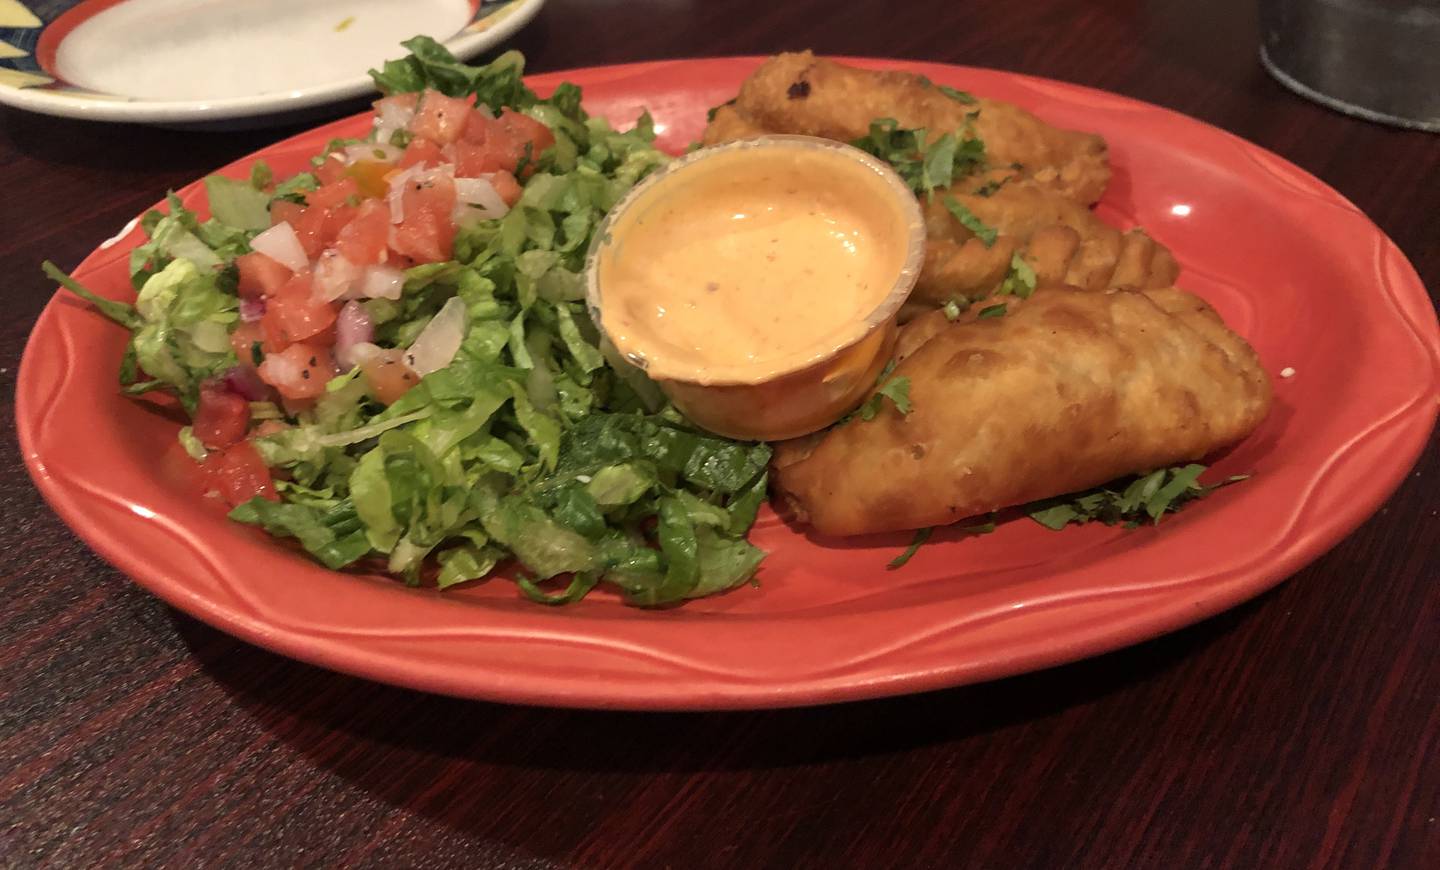 No Manches! Mexican Grill, 140 N Western Avenue (Route 31), in Carpentersville, offers fresh and authentic Mexican food. The Mystery Diner and friend at here on Aug. 11, 2022.